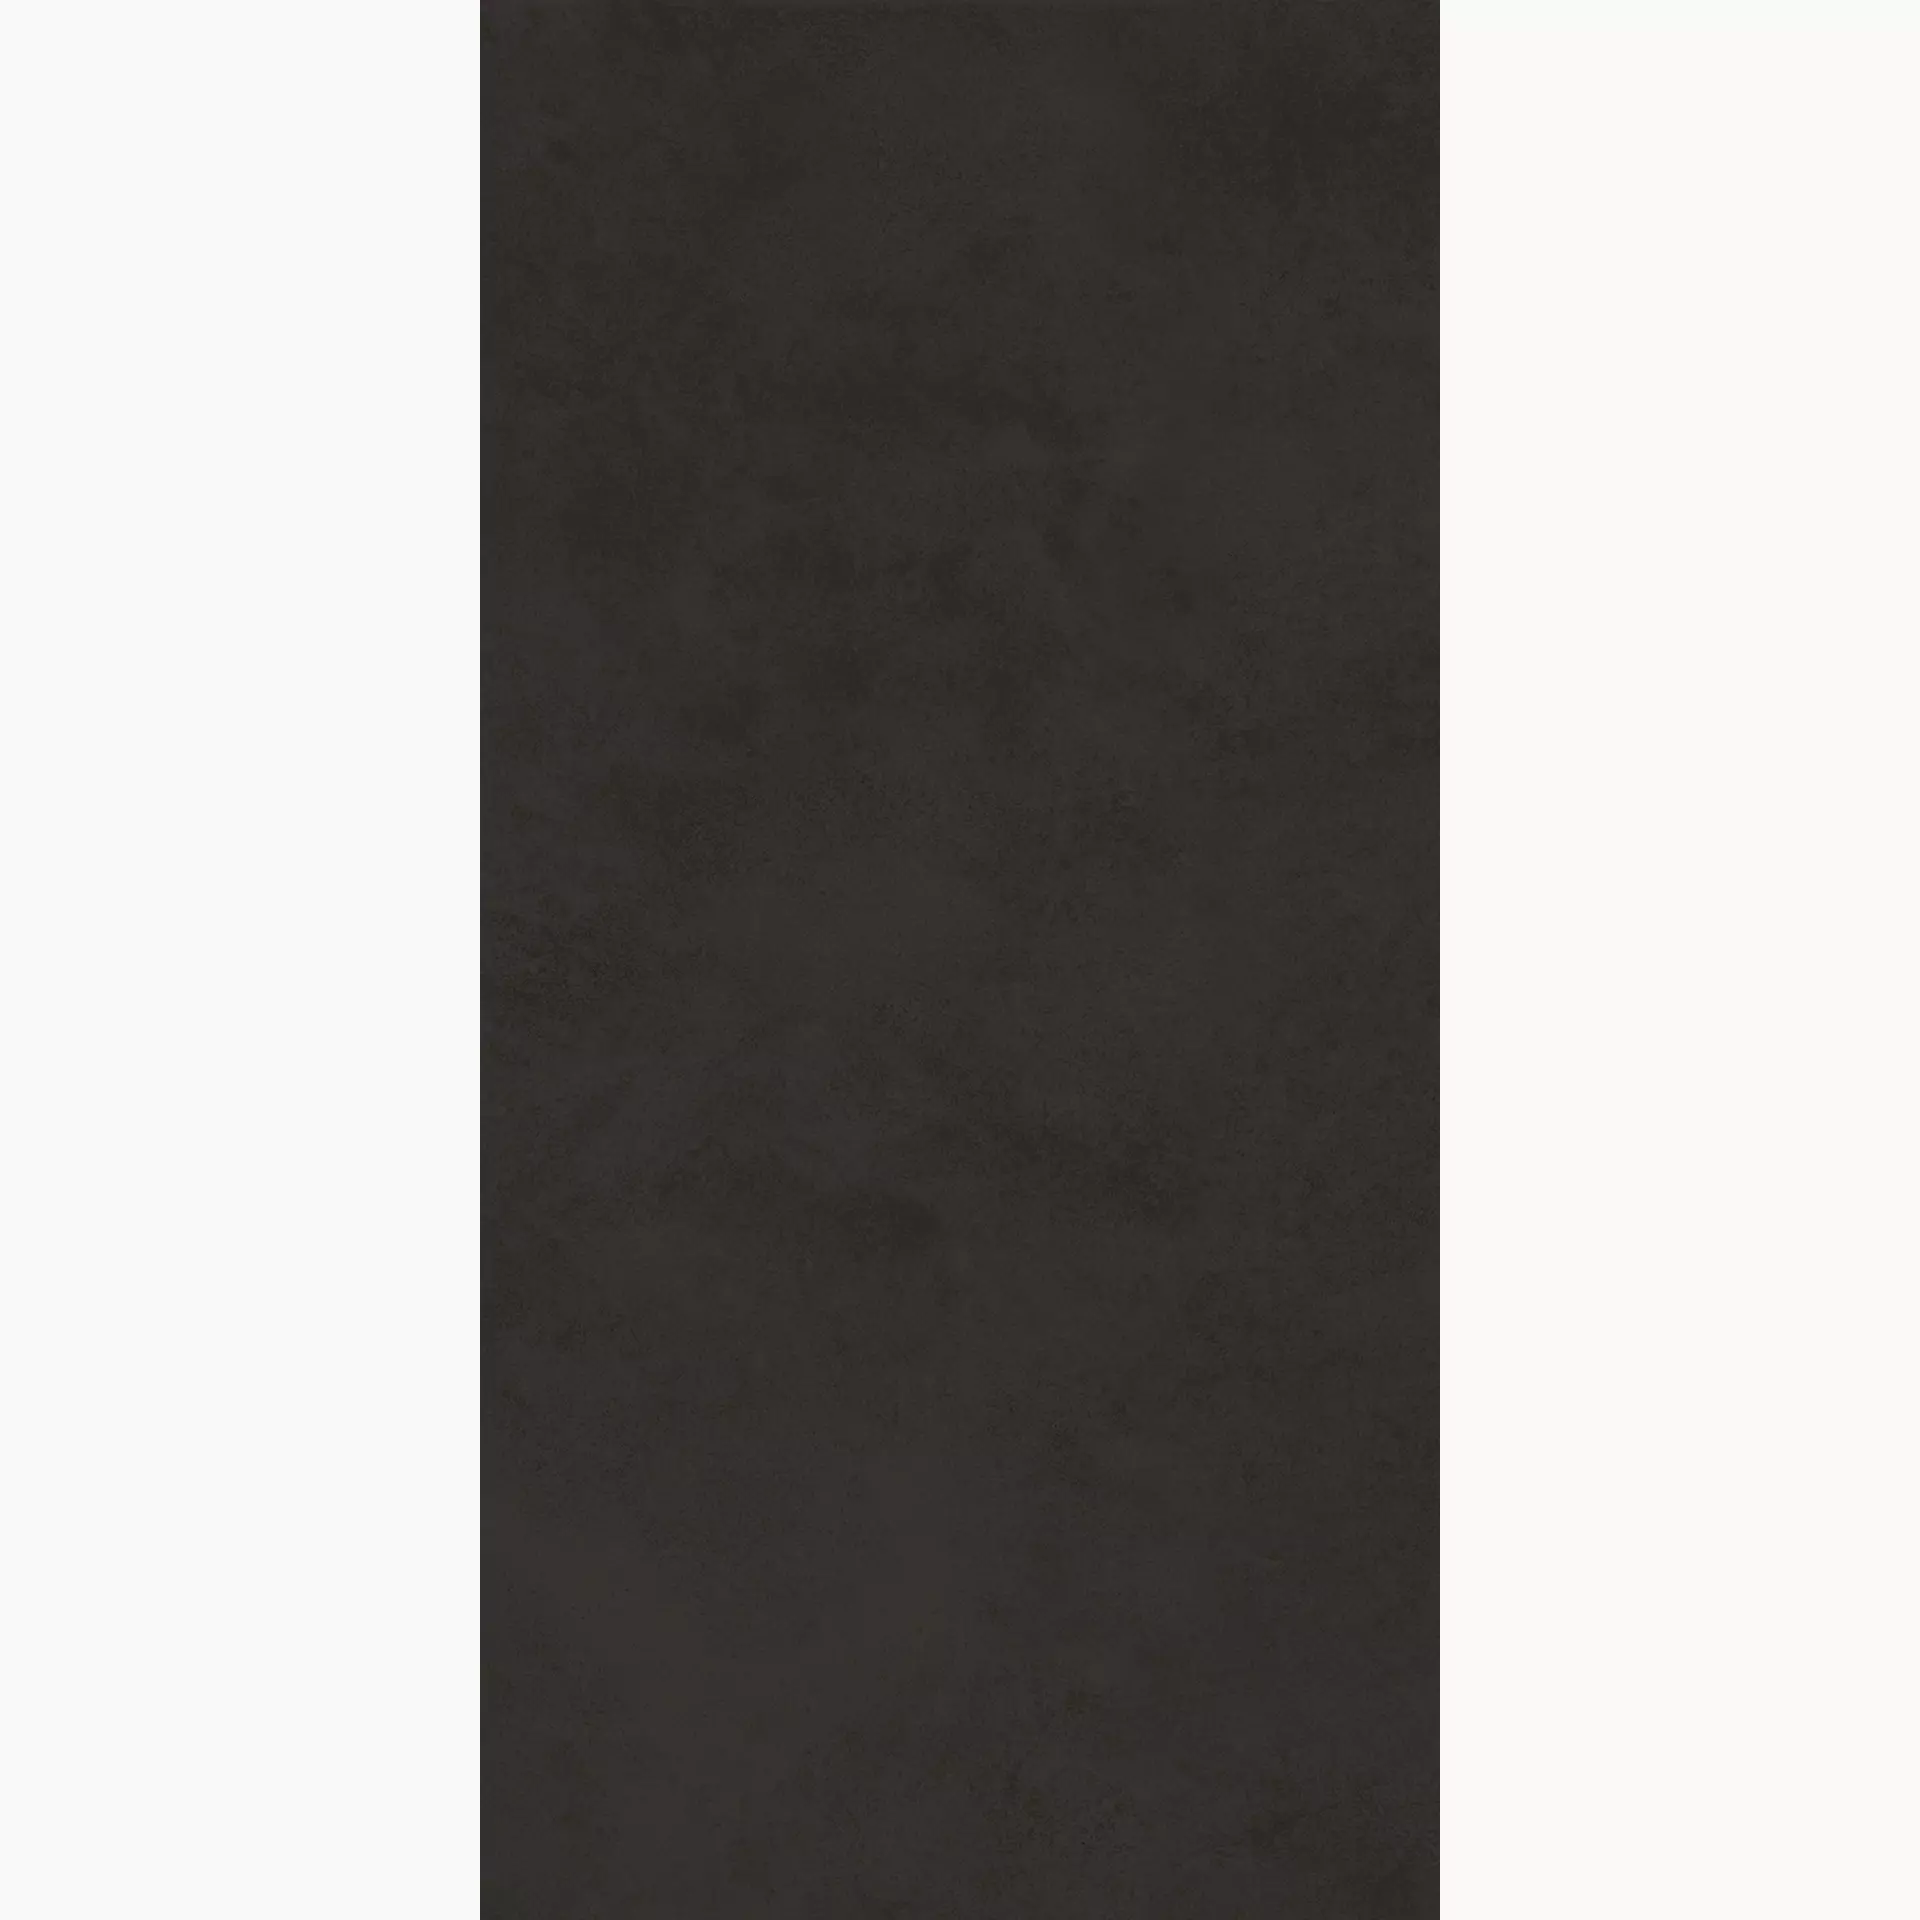 Margres Time 2.0 Black Natural B2562T29B 60x120cm rectified 11mm